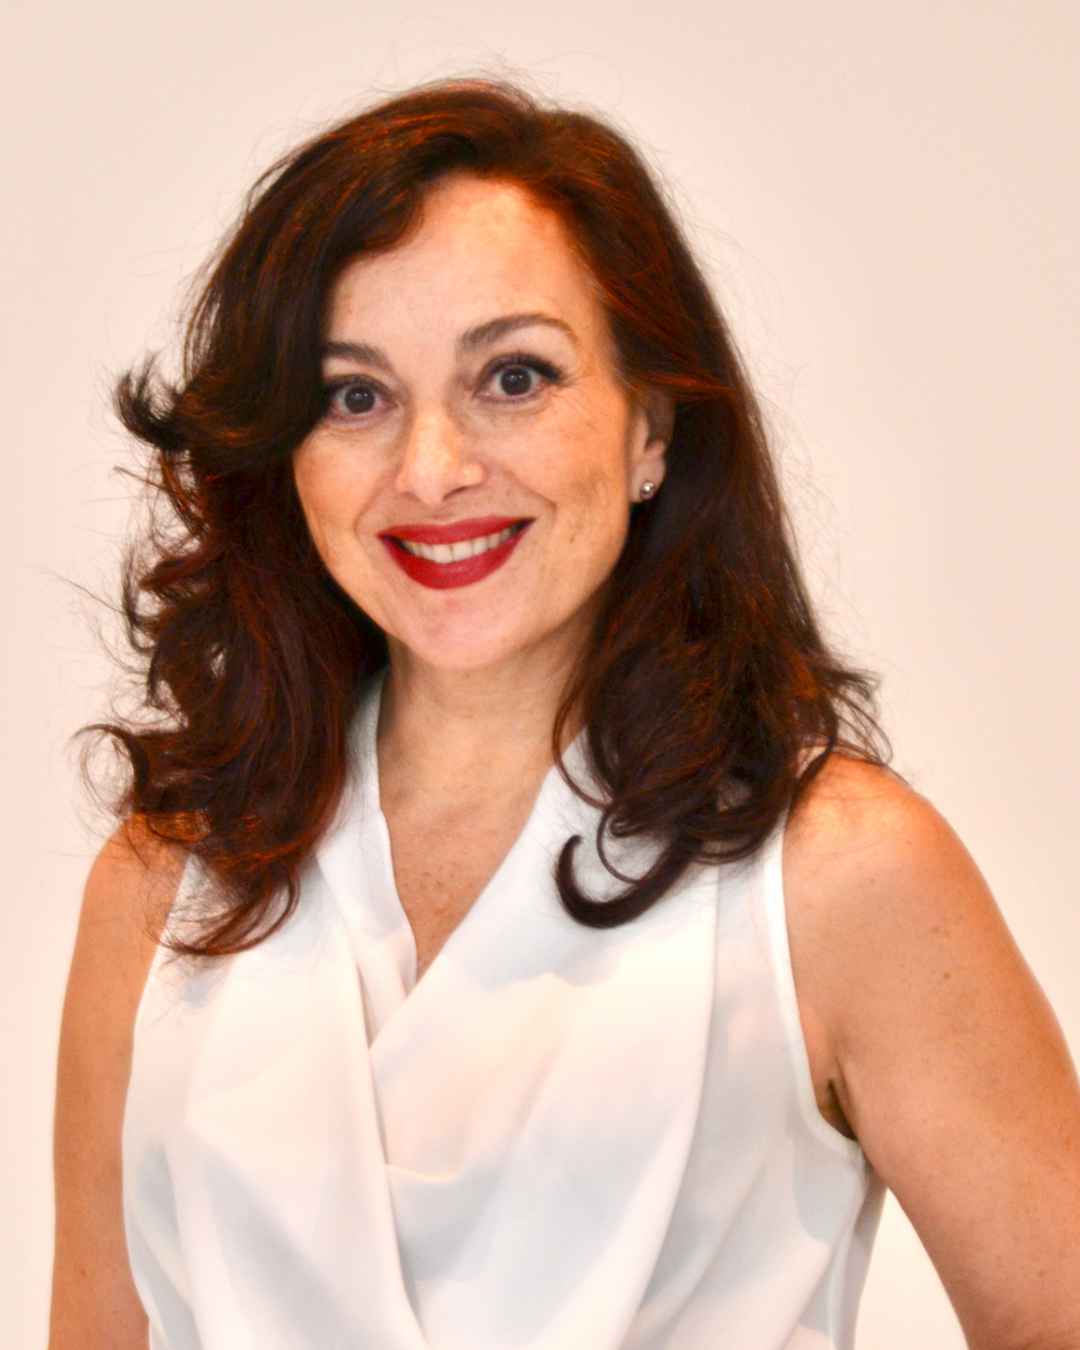 Dr Sofia Karapataki demonstrated that, with Patent™ implants, successful long-term restorations can be achieved in daily practice. In a groundbreaking retrospective study, she observed impressive results of over 90 inserted Patent™ implants over a functional period of five to 12 years: even after 12 years, none of these showed signs of peri-implantitis.